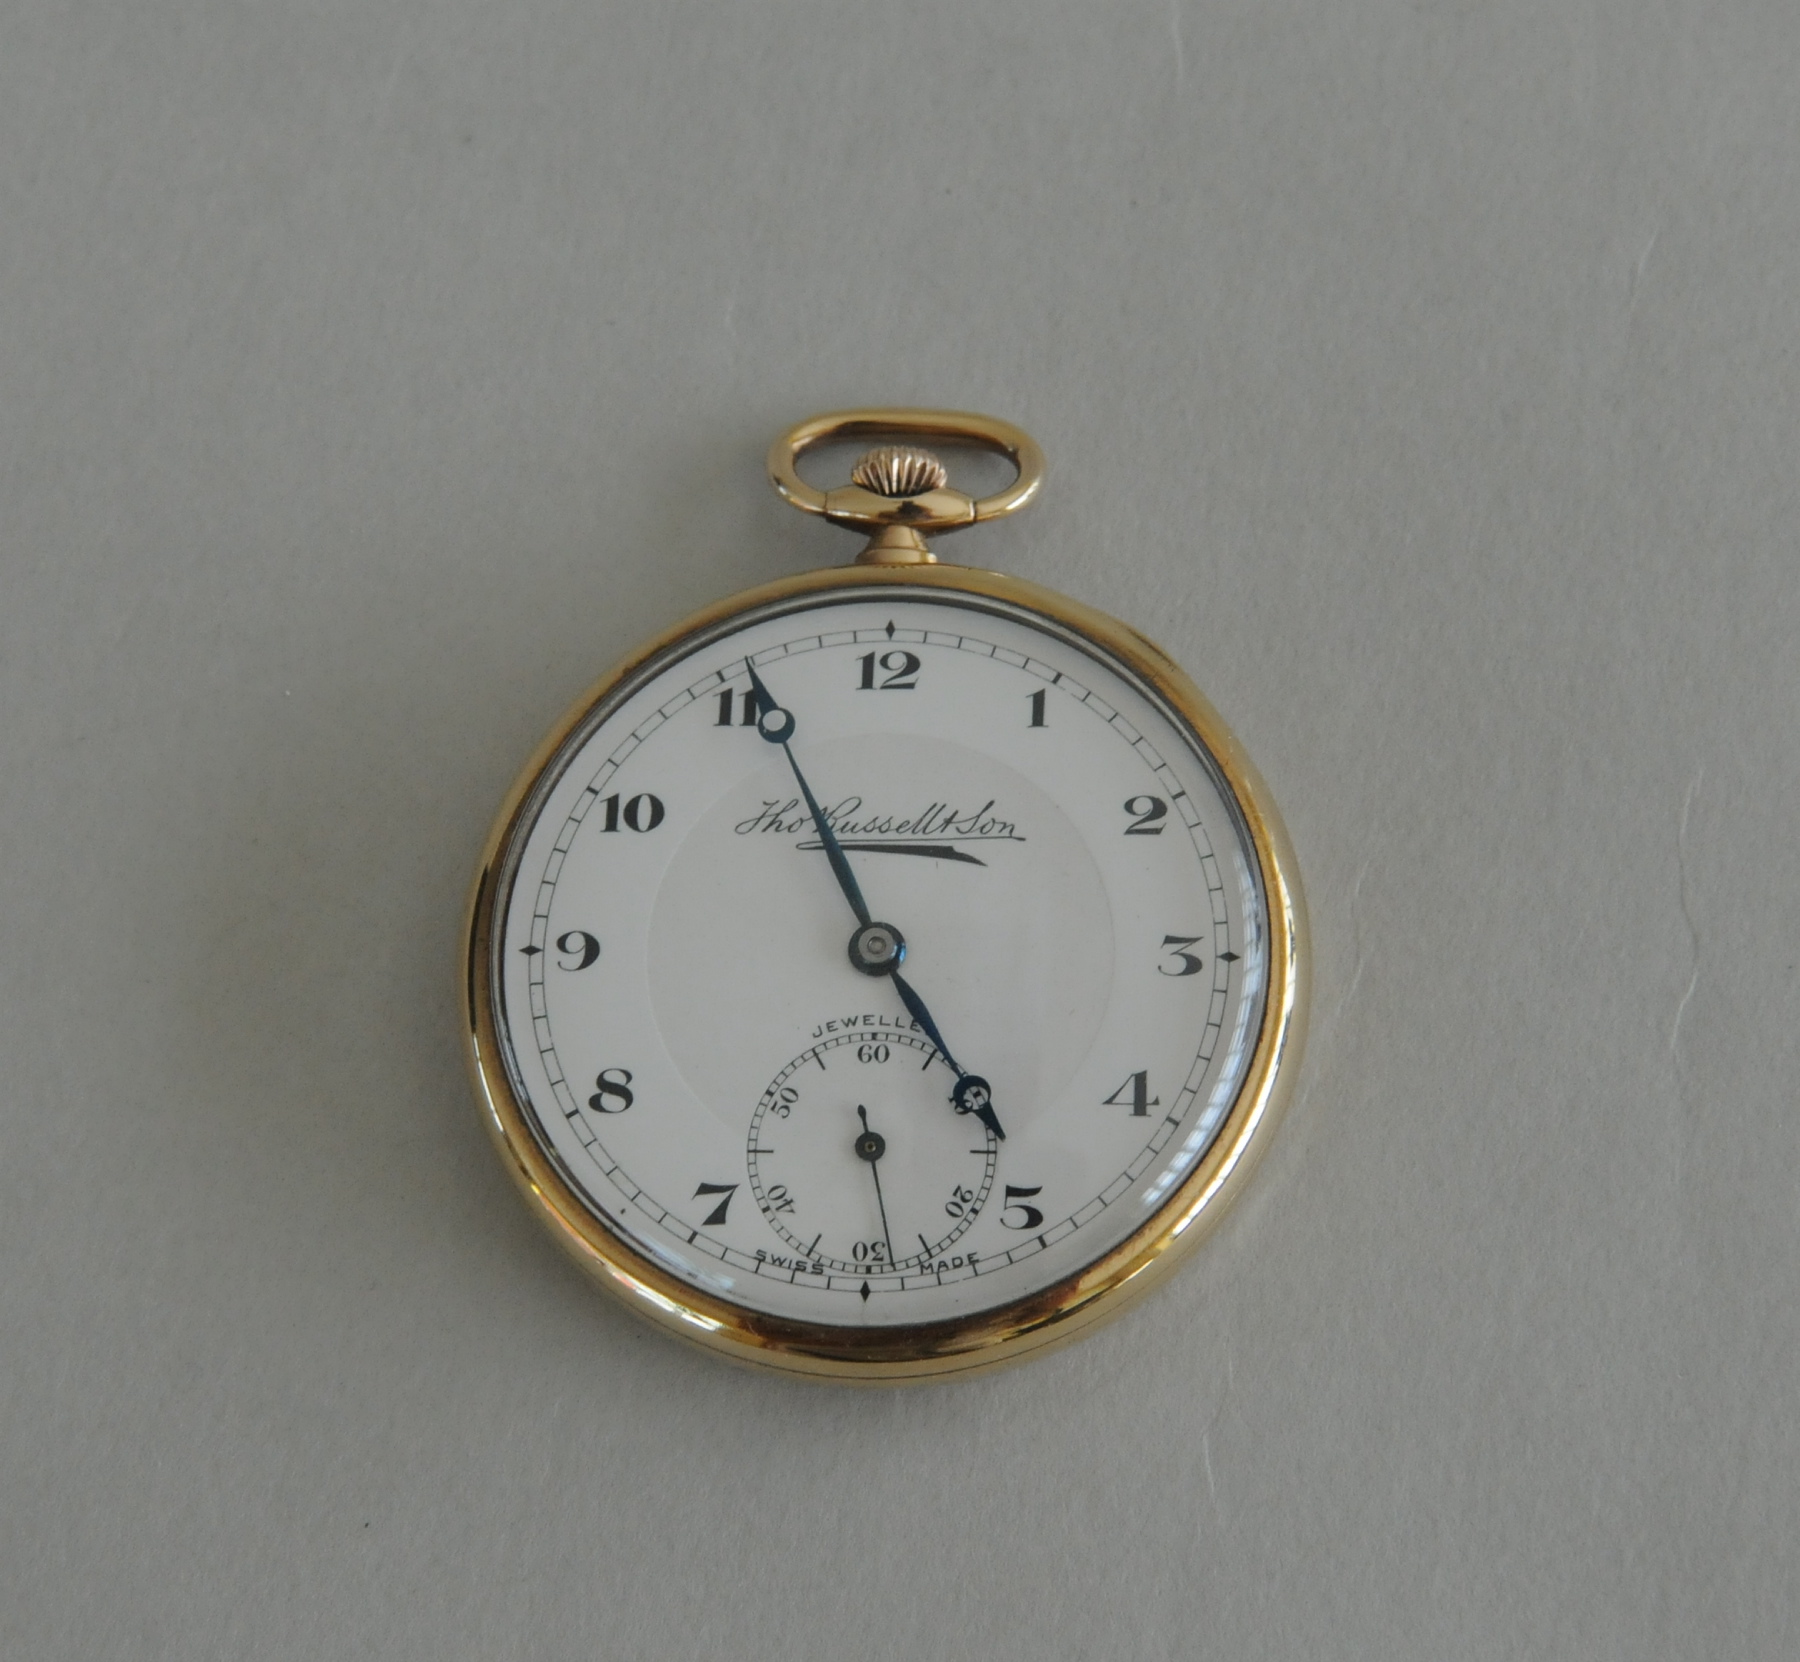 Swiss lever dress watch for Russells, in 9ct gold openface case, 1949.